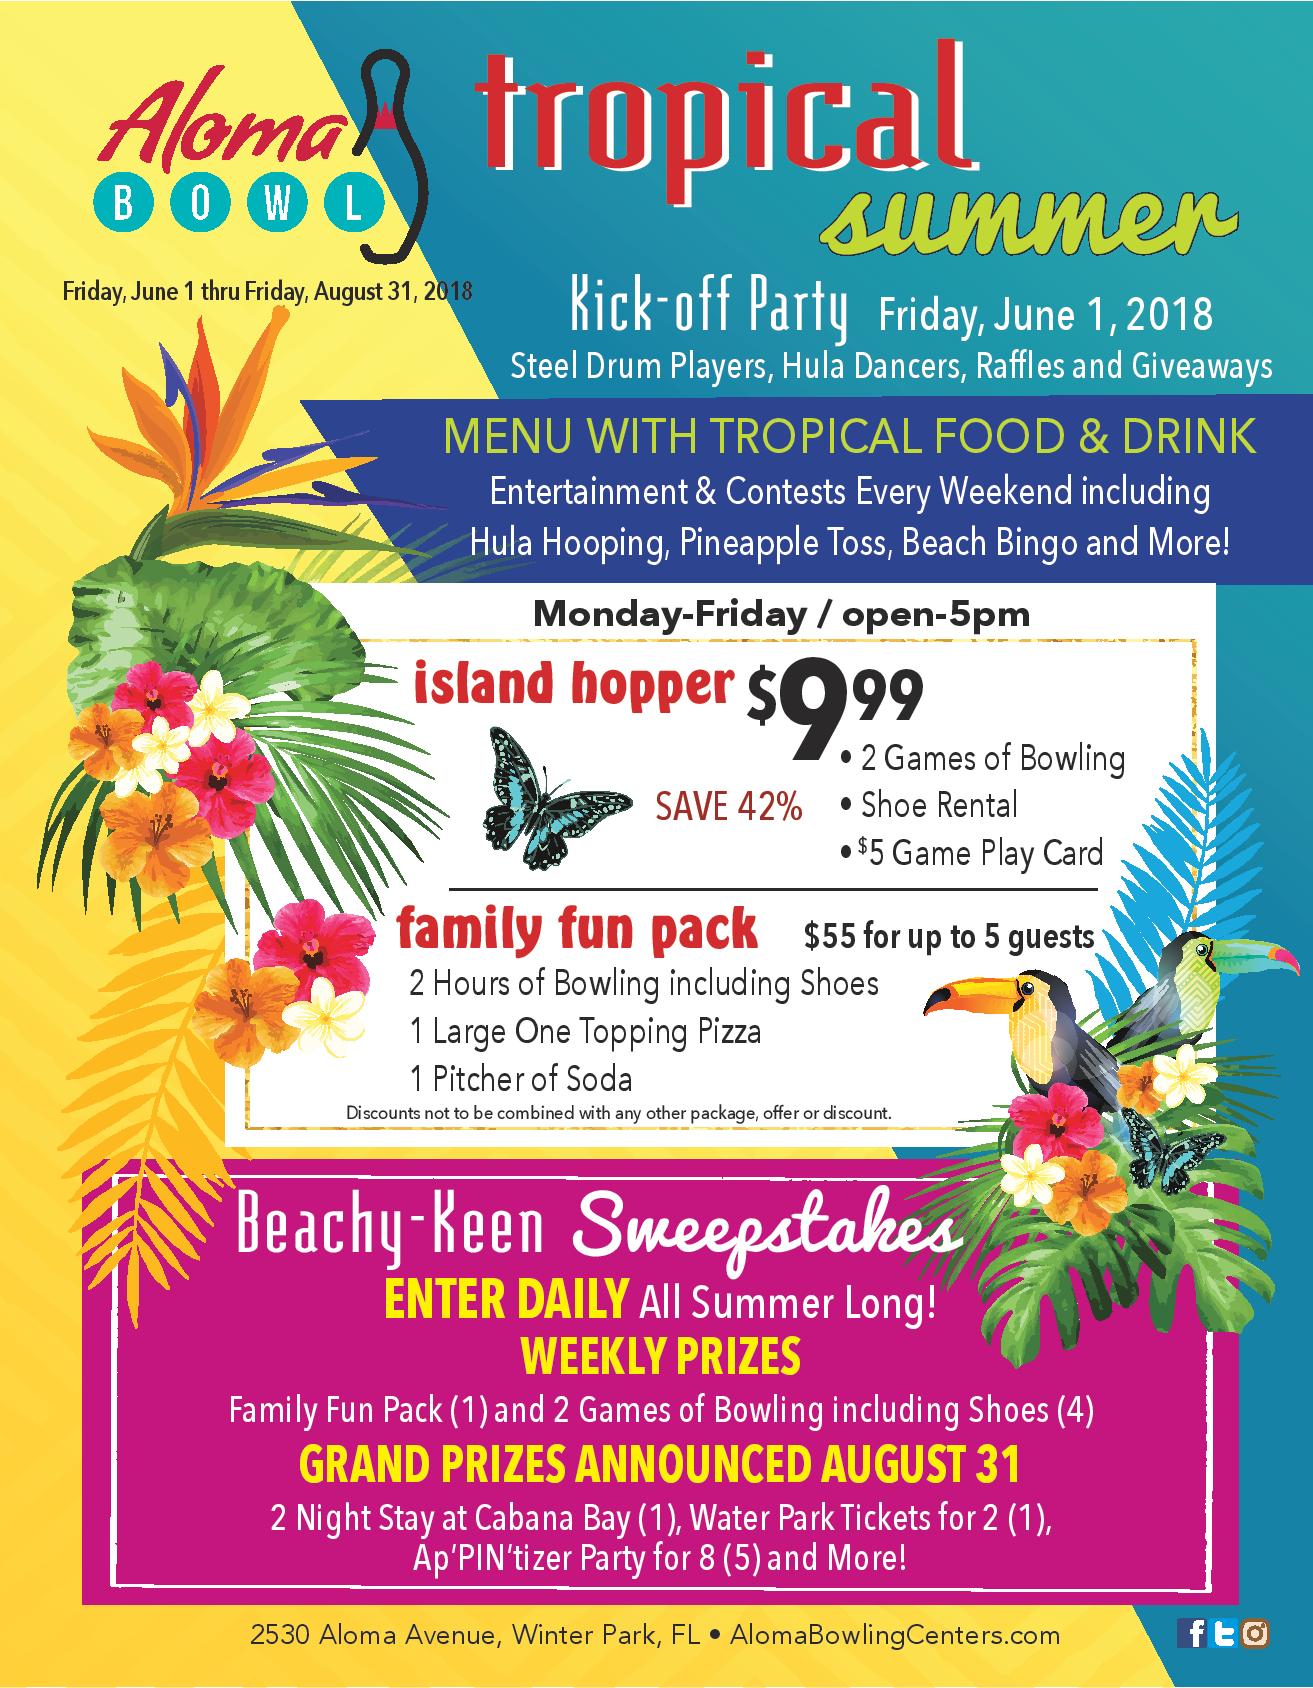 Aloma Bowling Centers offer discounts, sweepstakes during Tropical ...